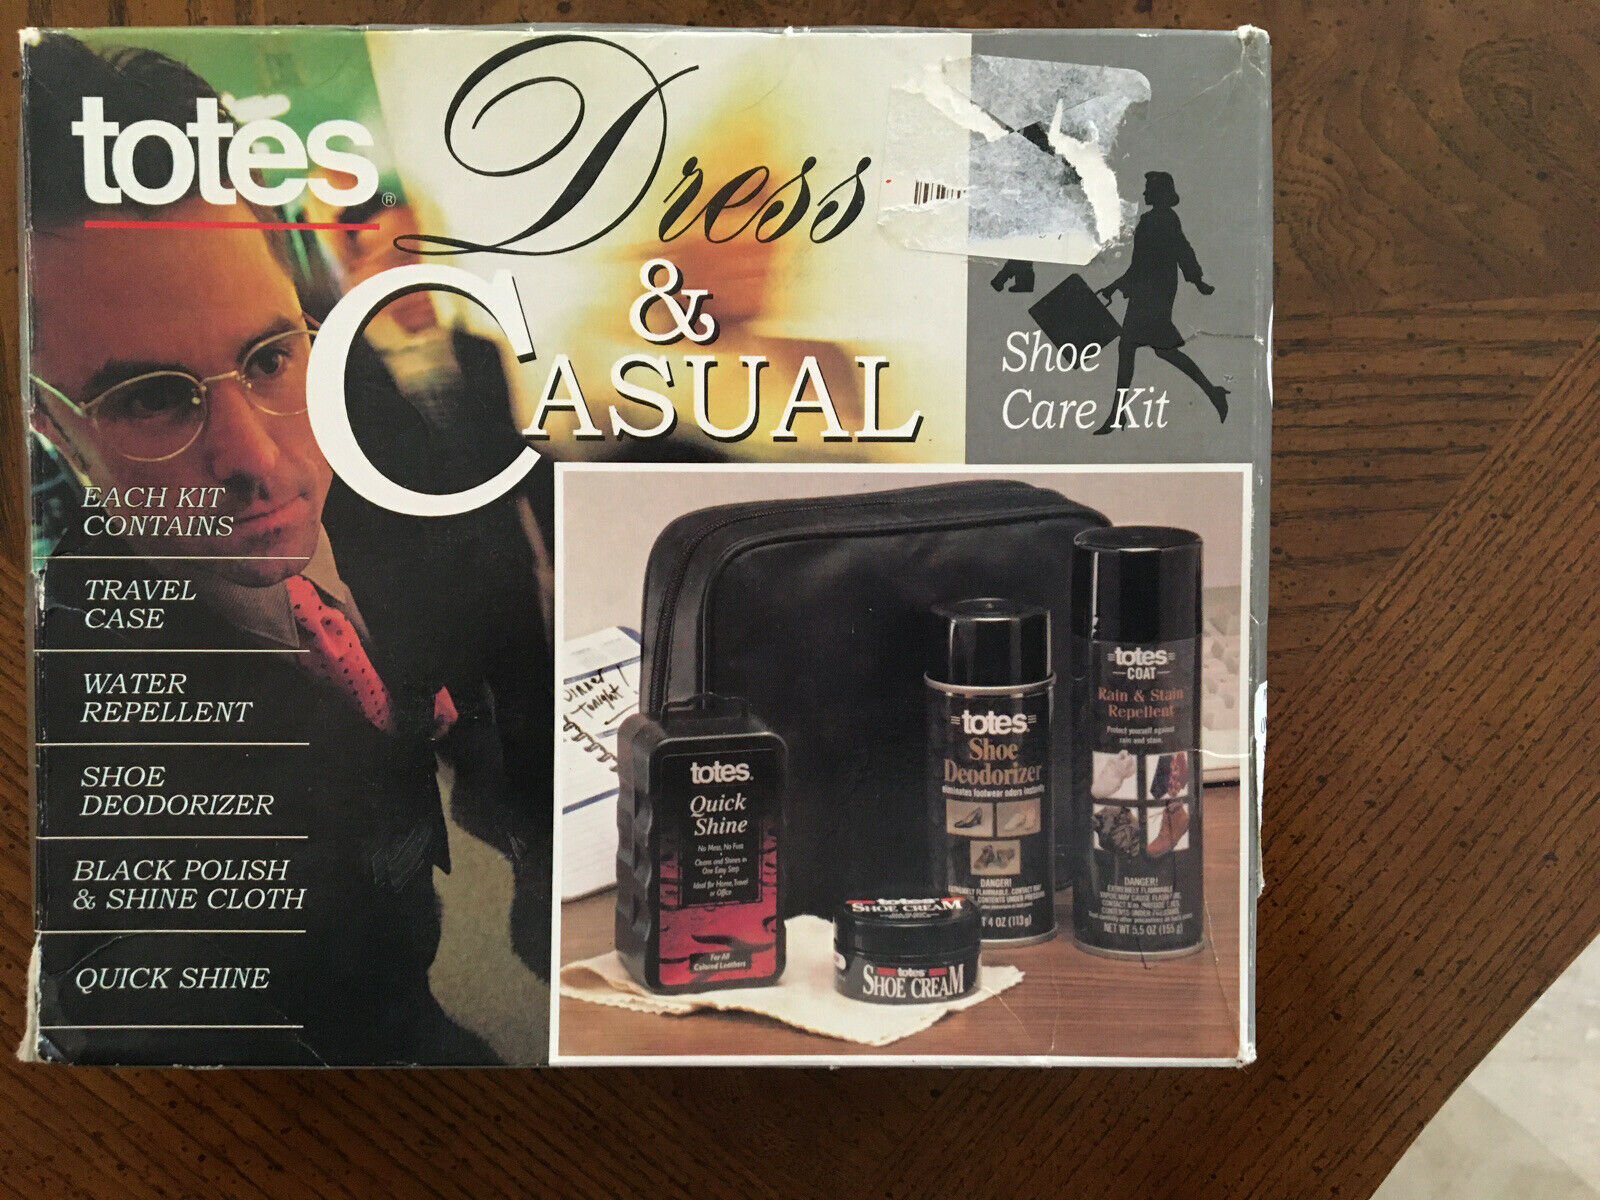 Totes Dress & Casual Shoe Care Kit with travel case, Allied Shoe Products LLC